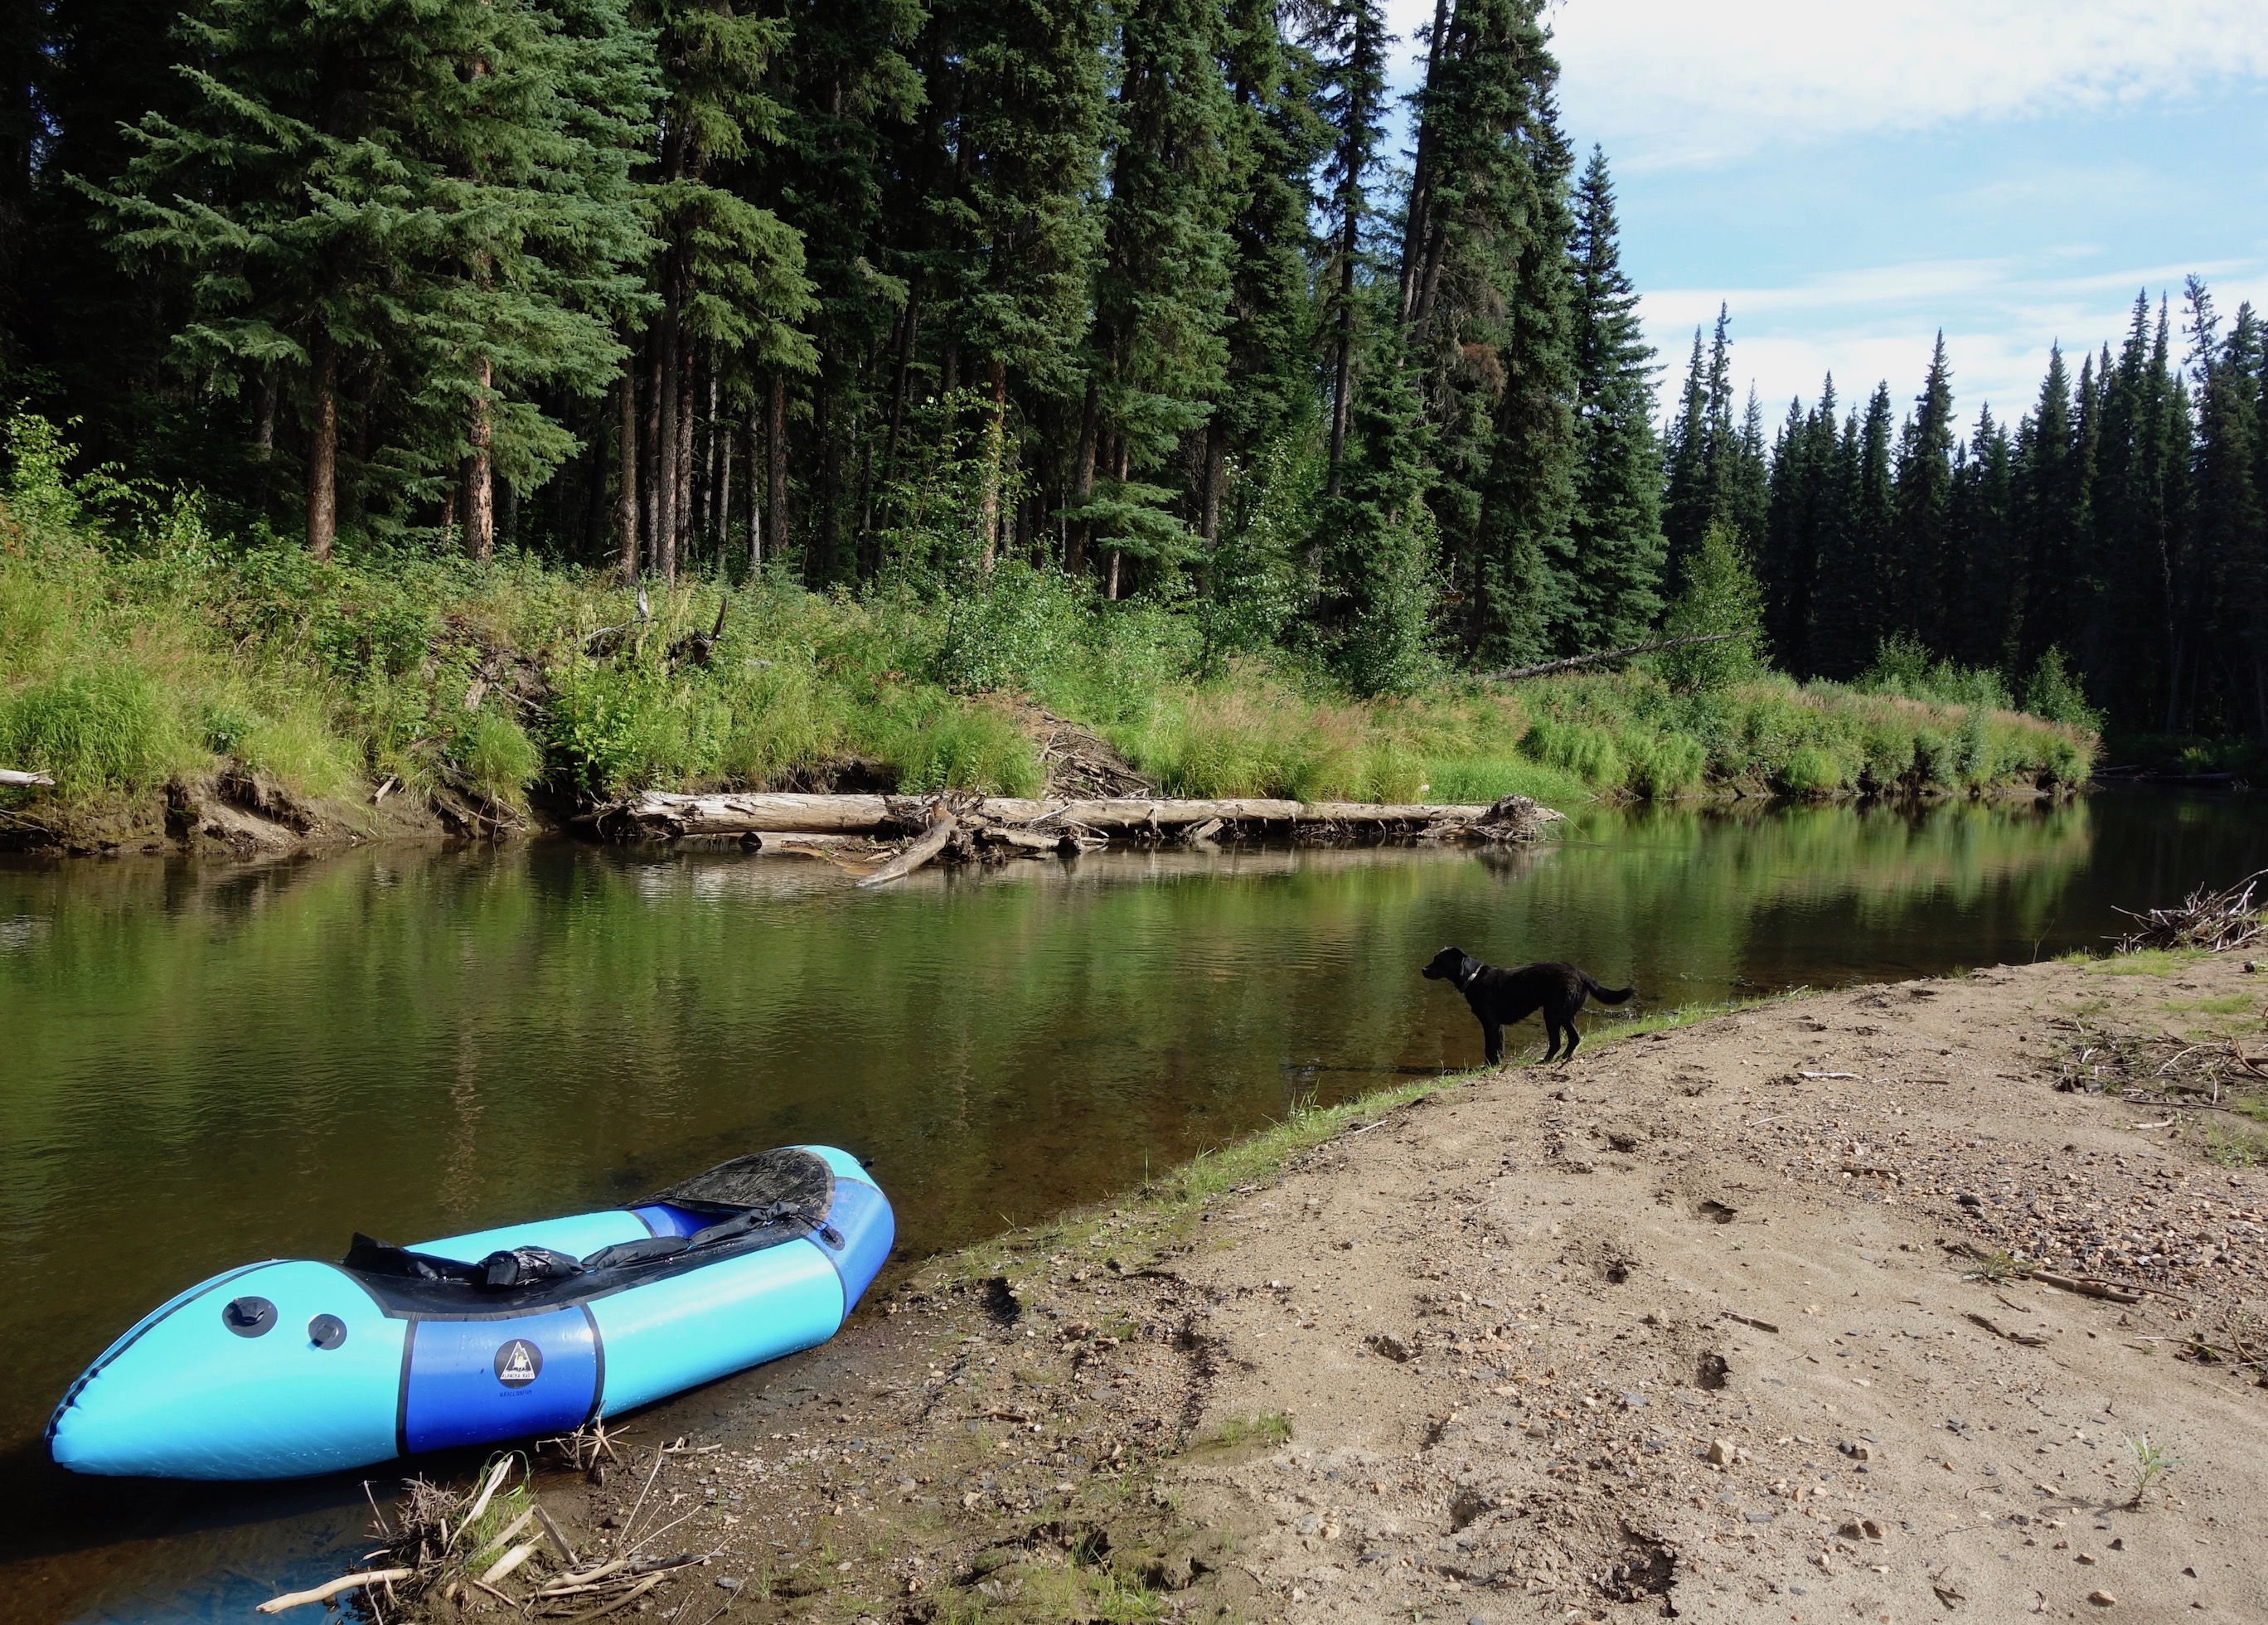 A sky blue packraft sits on a sandbar of a river, with a black dog to the right also on the sandbar.